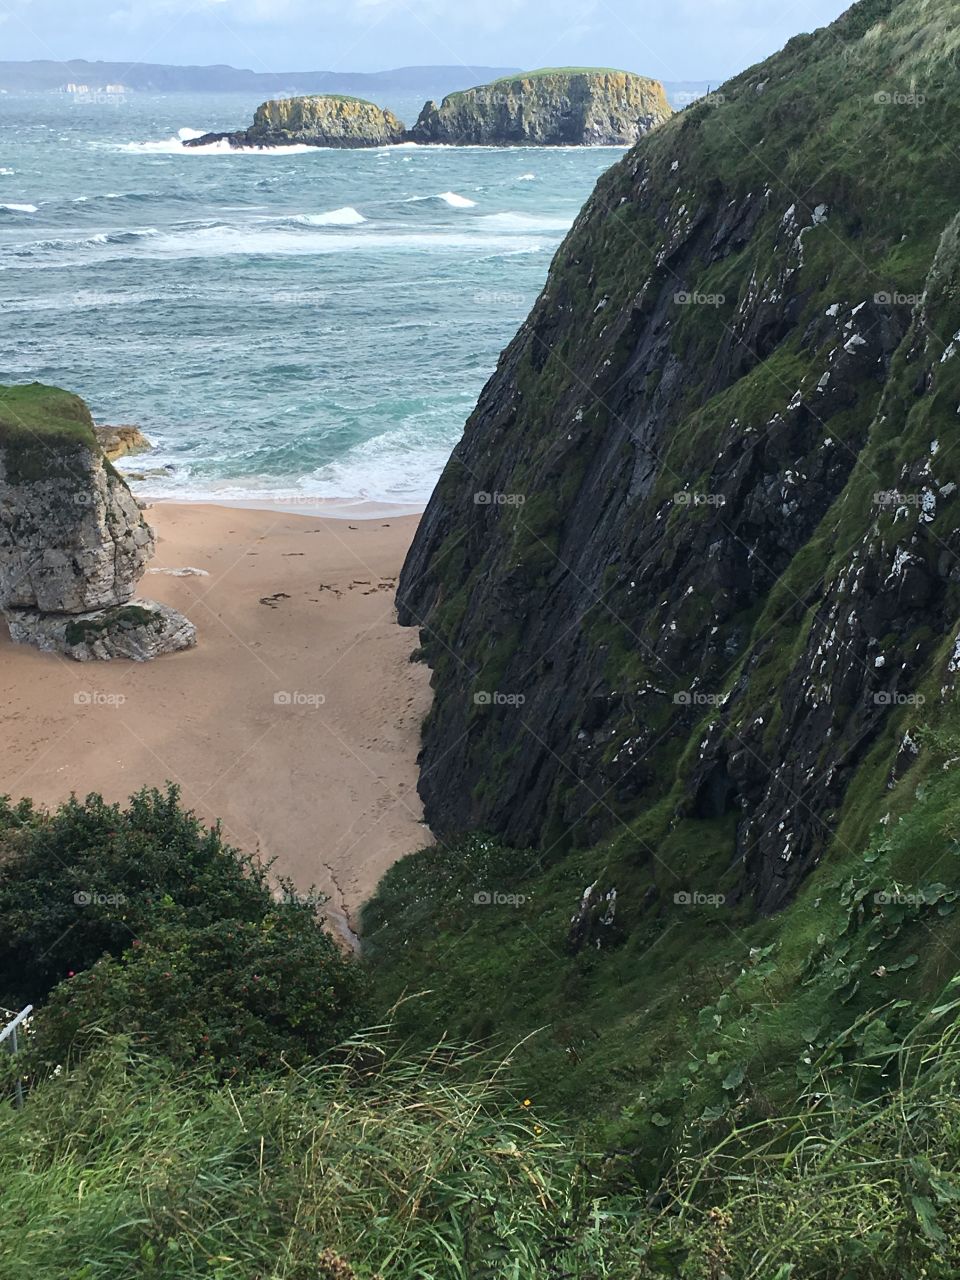 Looking down at a small beach from a cliff in Ireland 